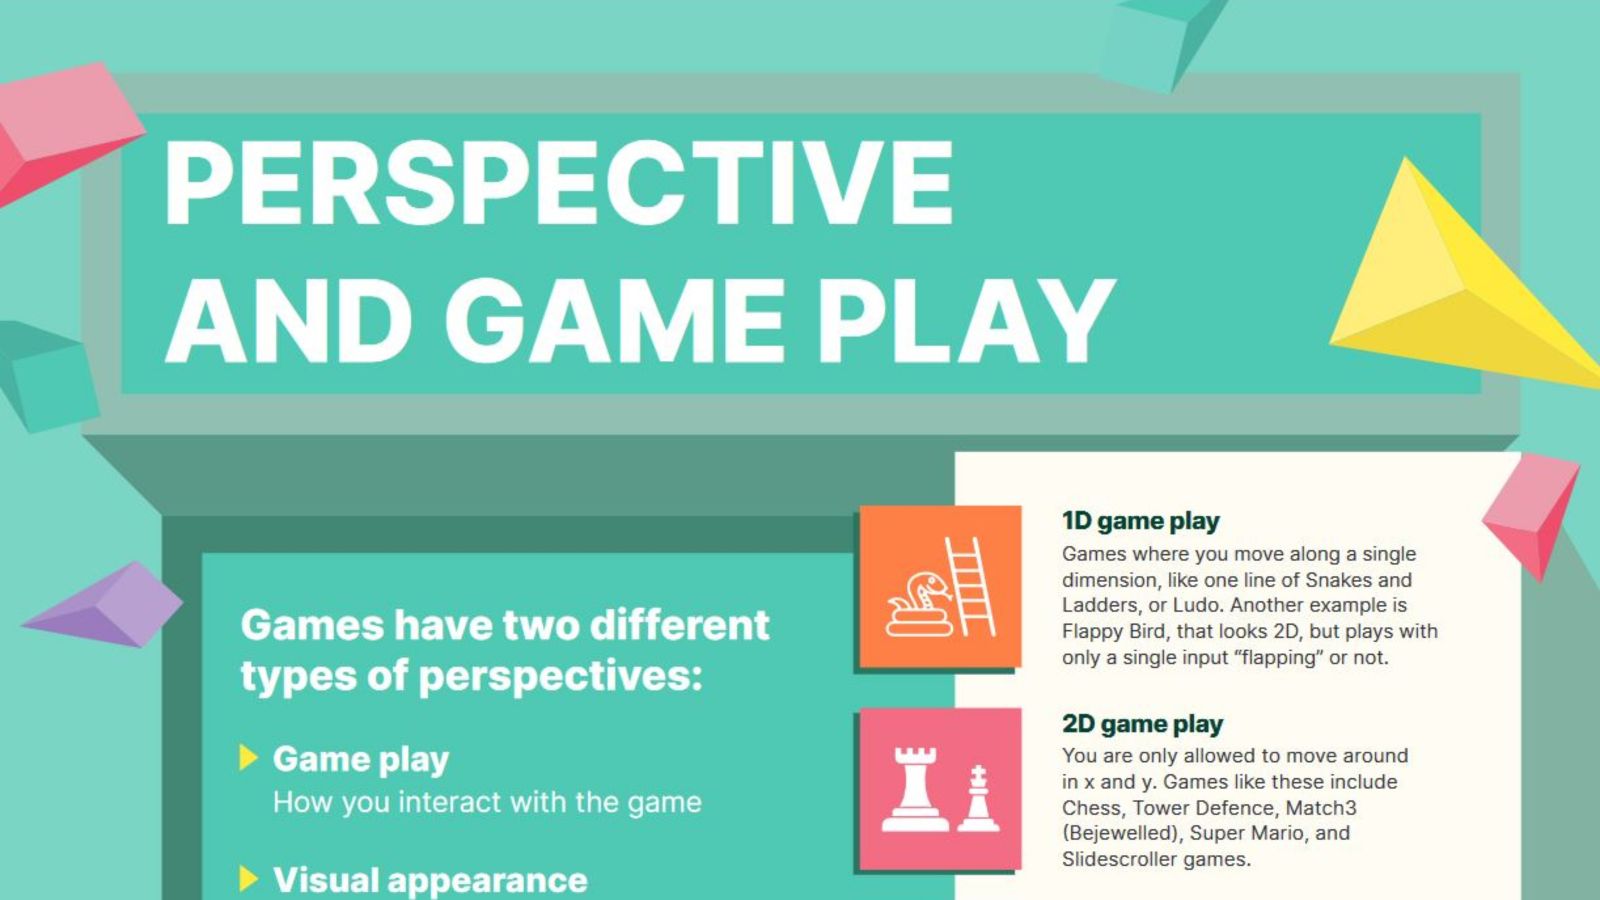 A PDF poster about perspective and game play